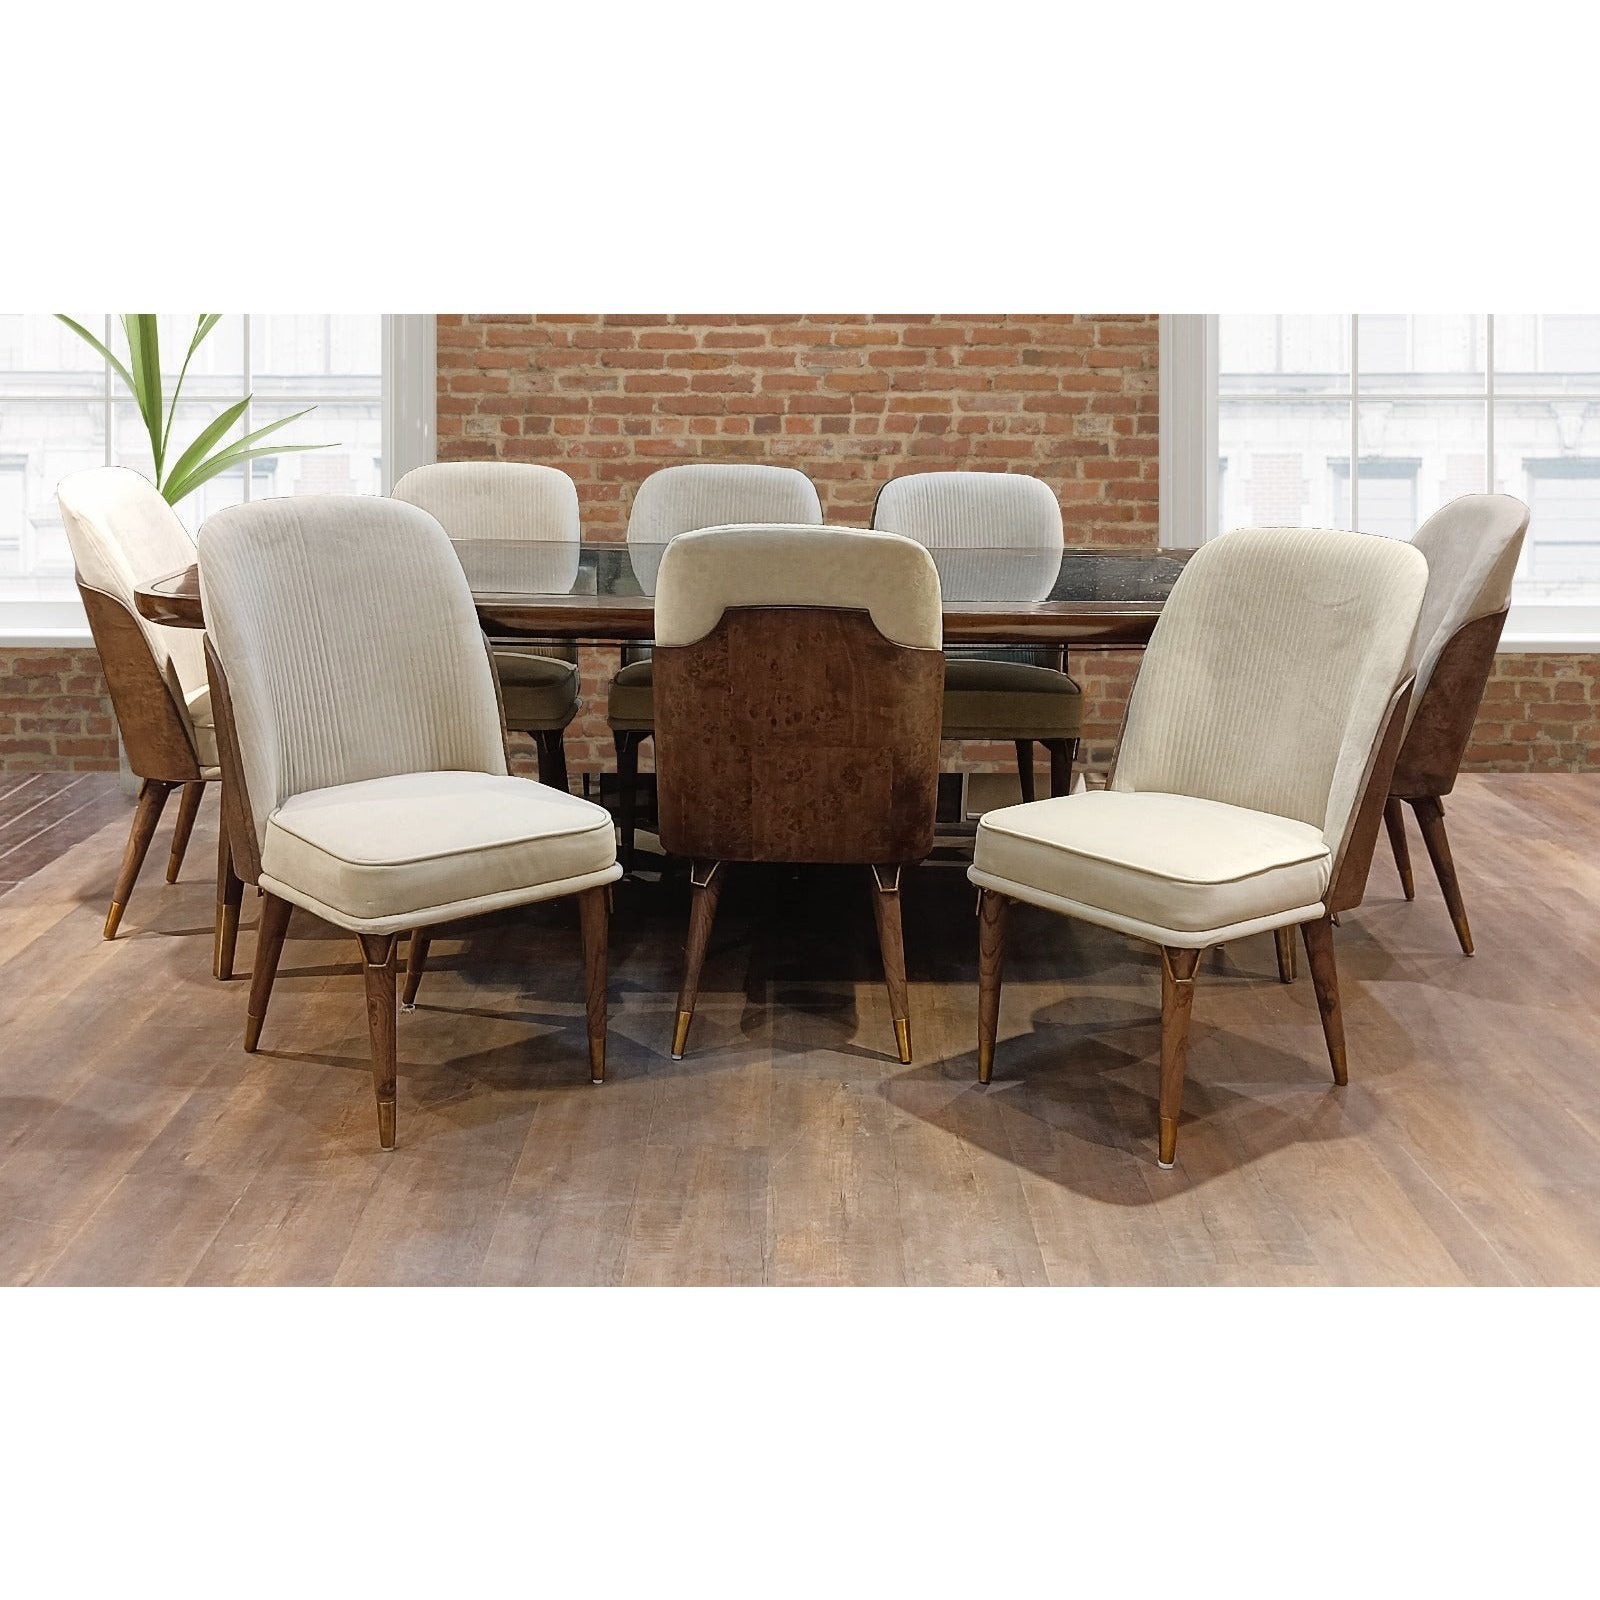 GU-AZURE LUXURY DINING WITH CHAIR UPHOLSTERED Mobel Furniture